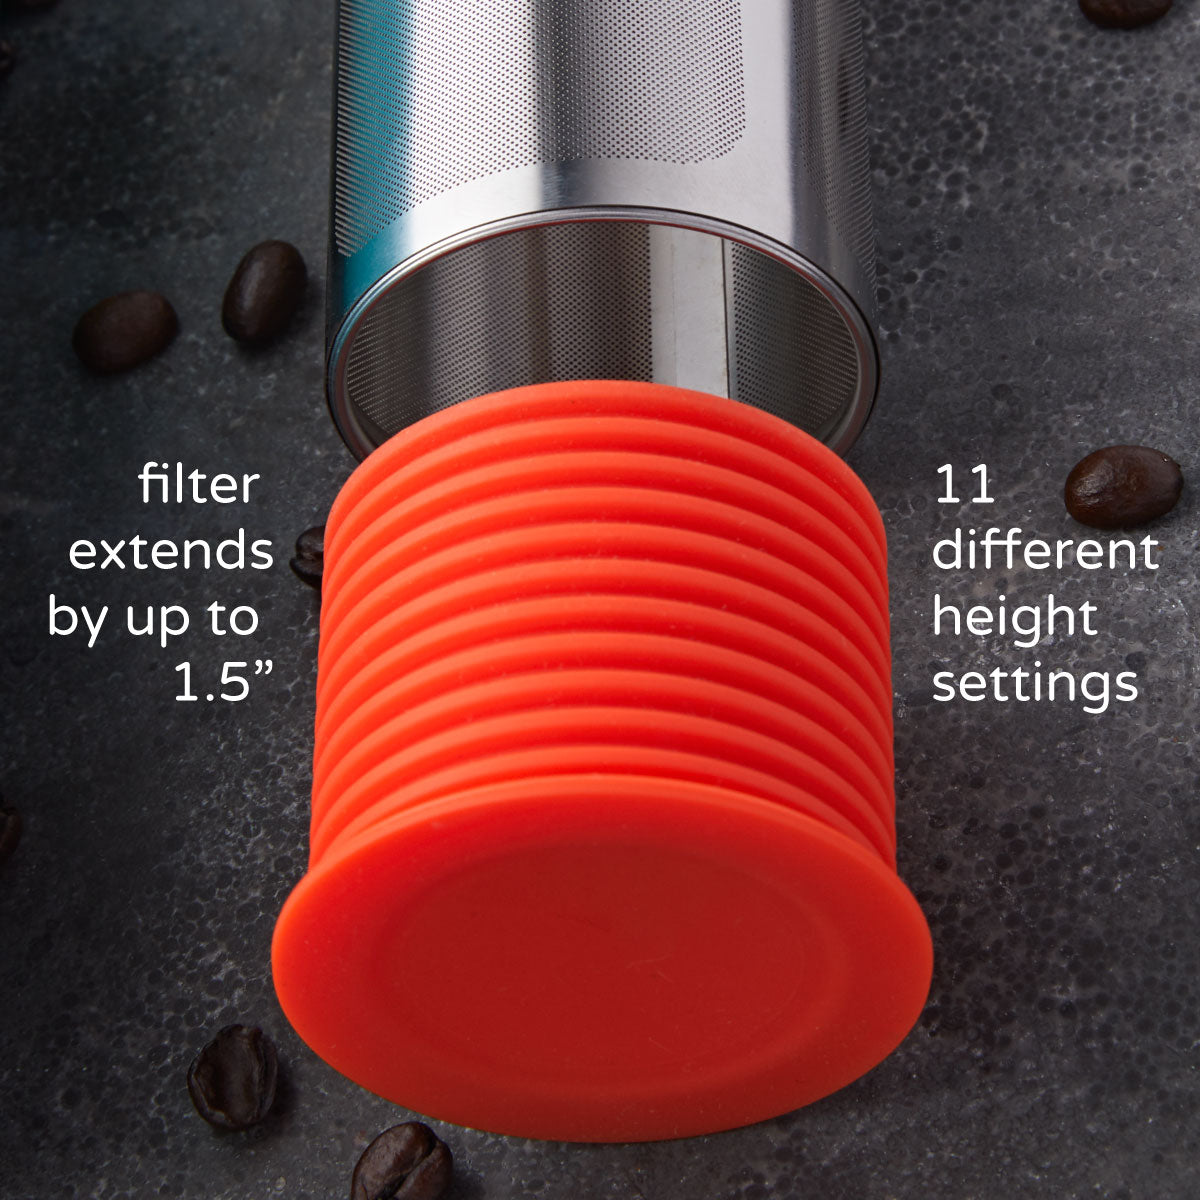 Rumble Go's silicone base is height adjustable to 11 different height settings at a range of 1.5"